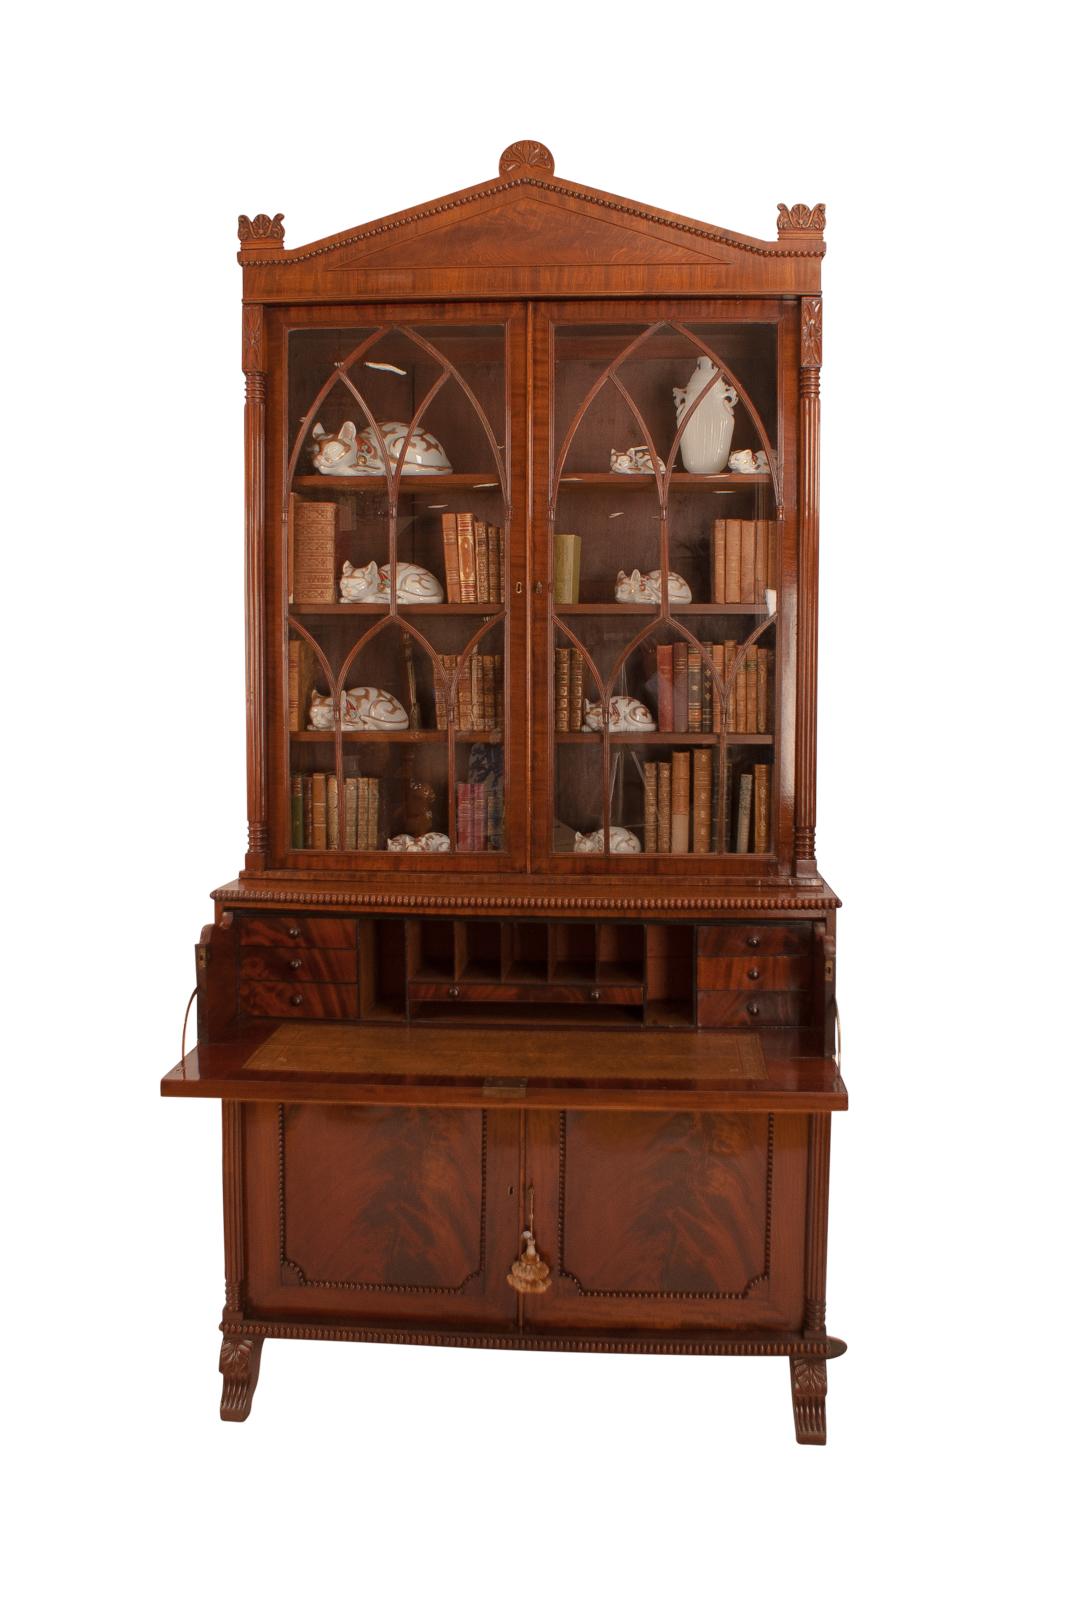 An English Regency Period mahogany cabinet bookcase with a secretary drawer and Gothic glazing, circa 1820. This piece has unusually nice wood with sophisticated classical design. The cabinet features a pediment with inlay, Gothic glazing and well